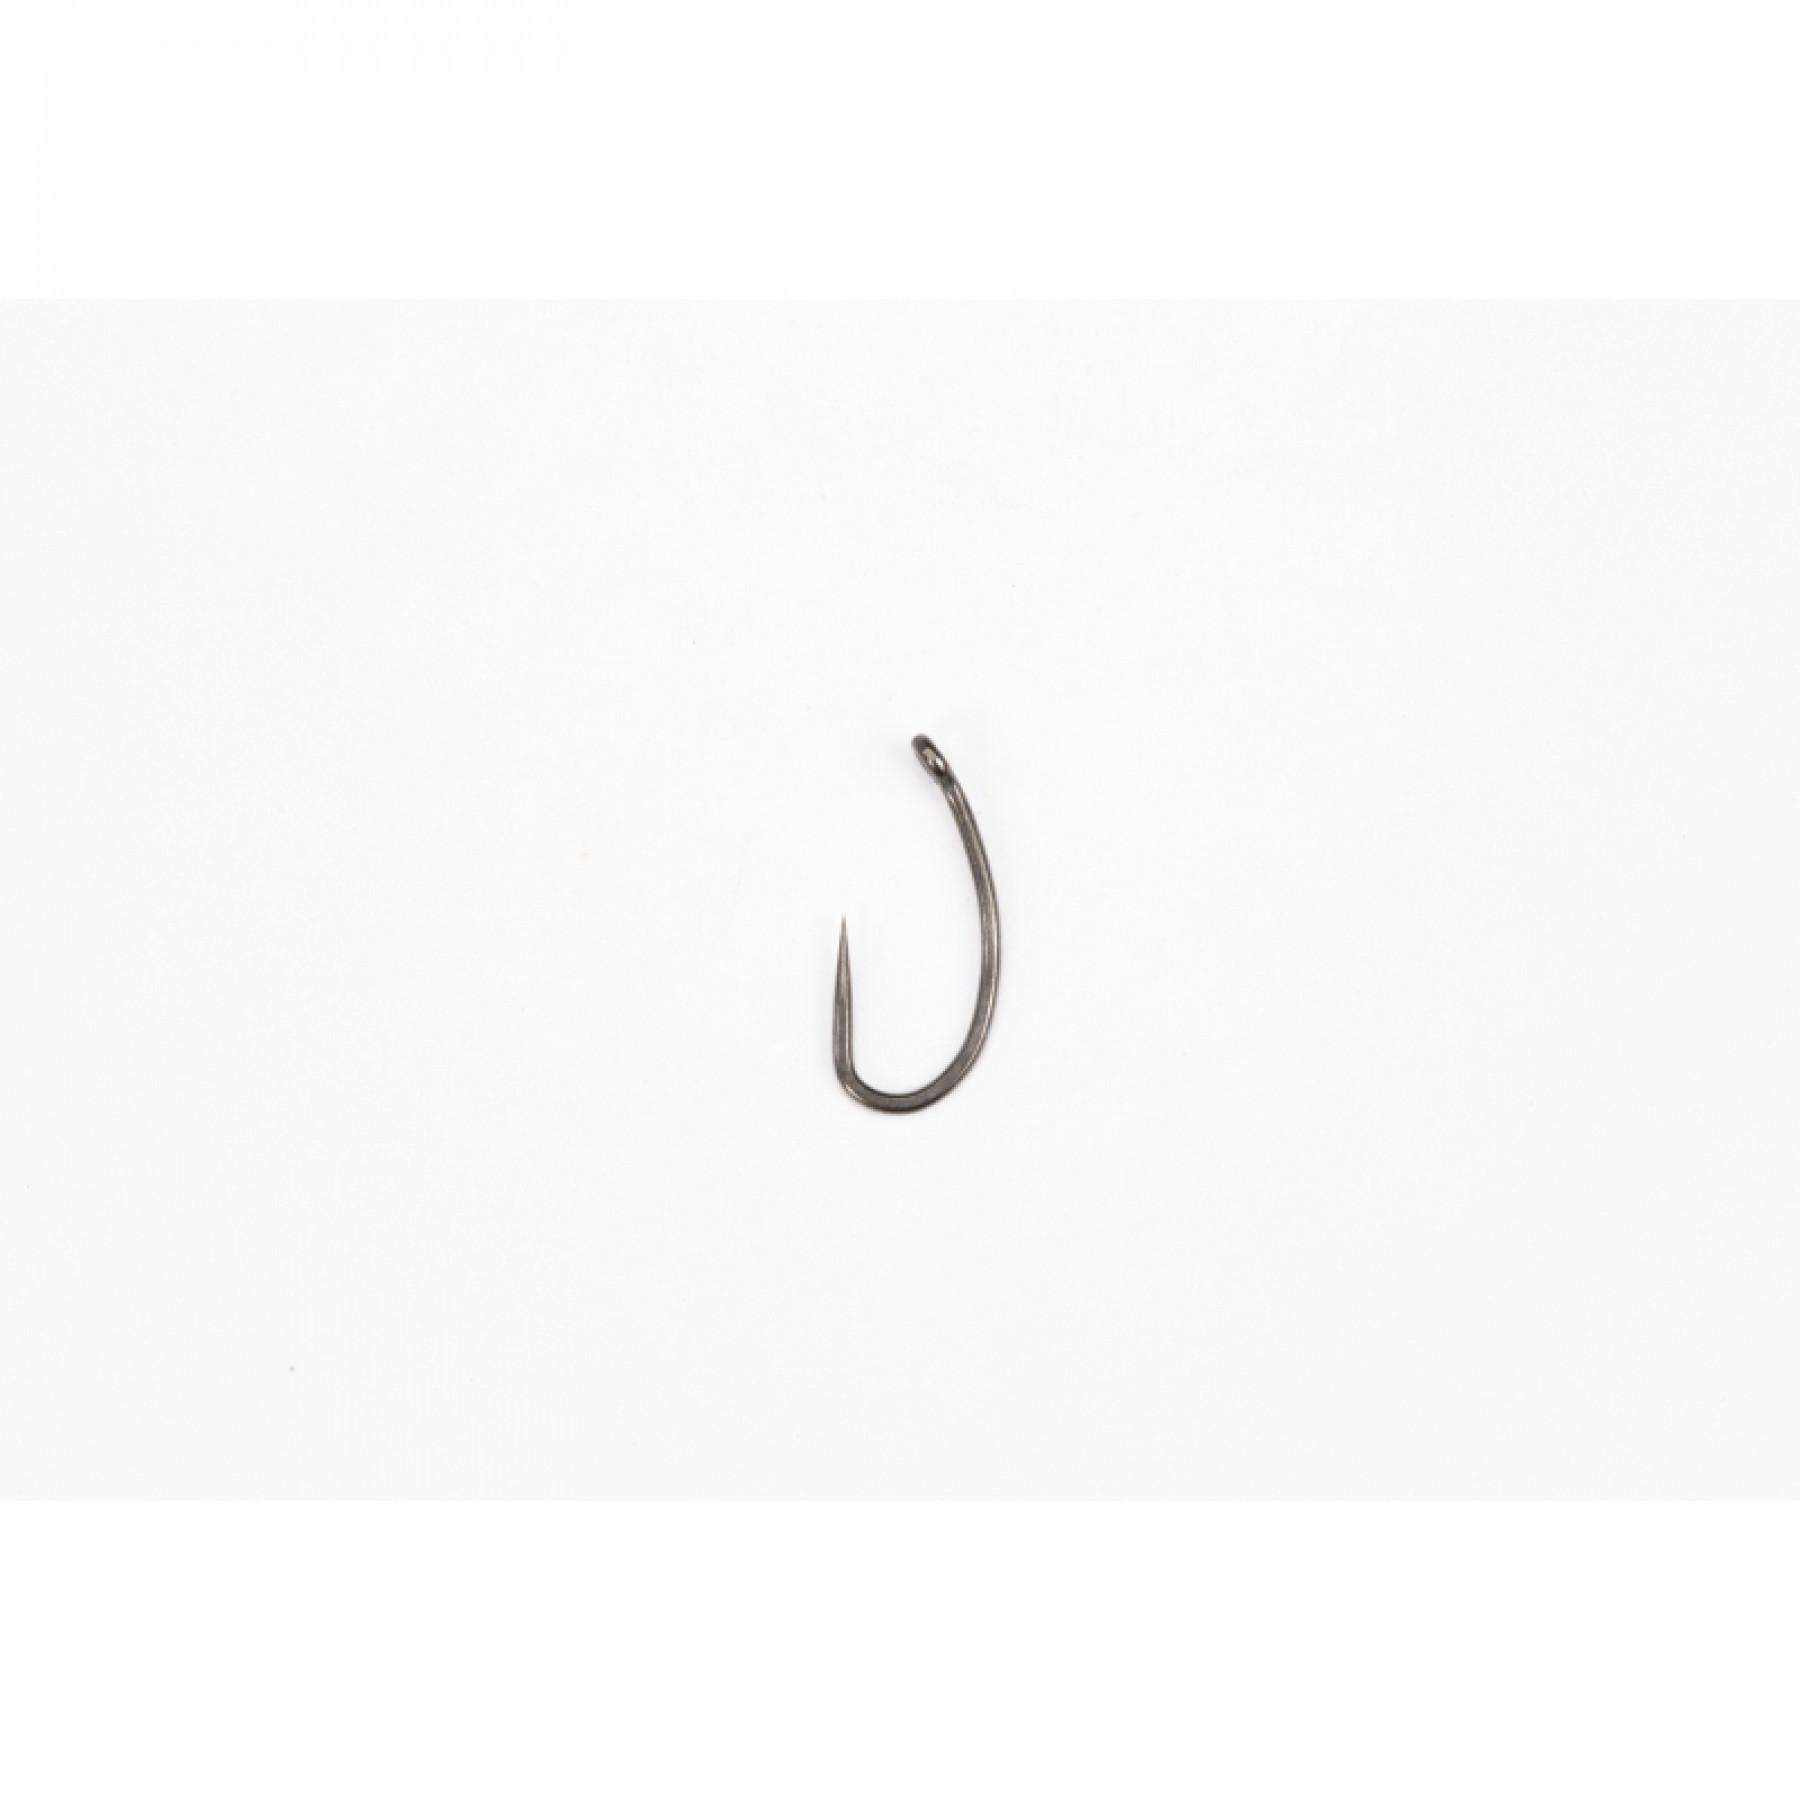 Hak Pinpoint Fang X taille 8 Micro Barbed